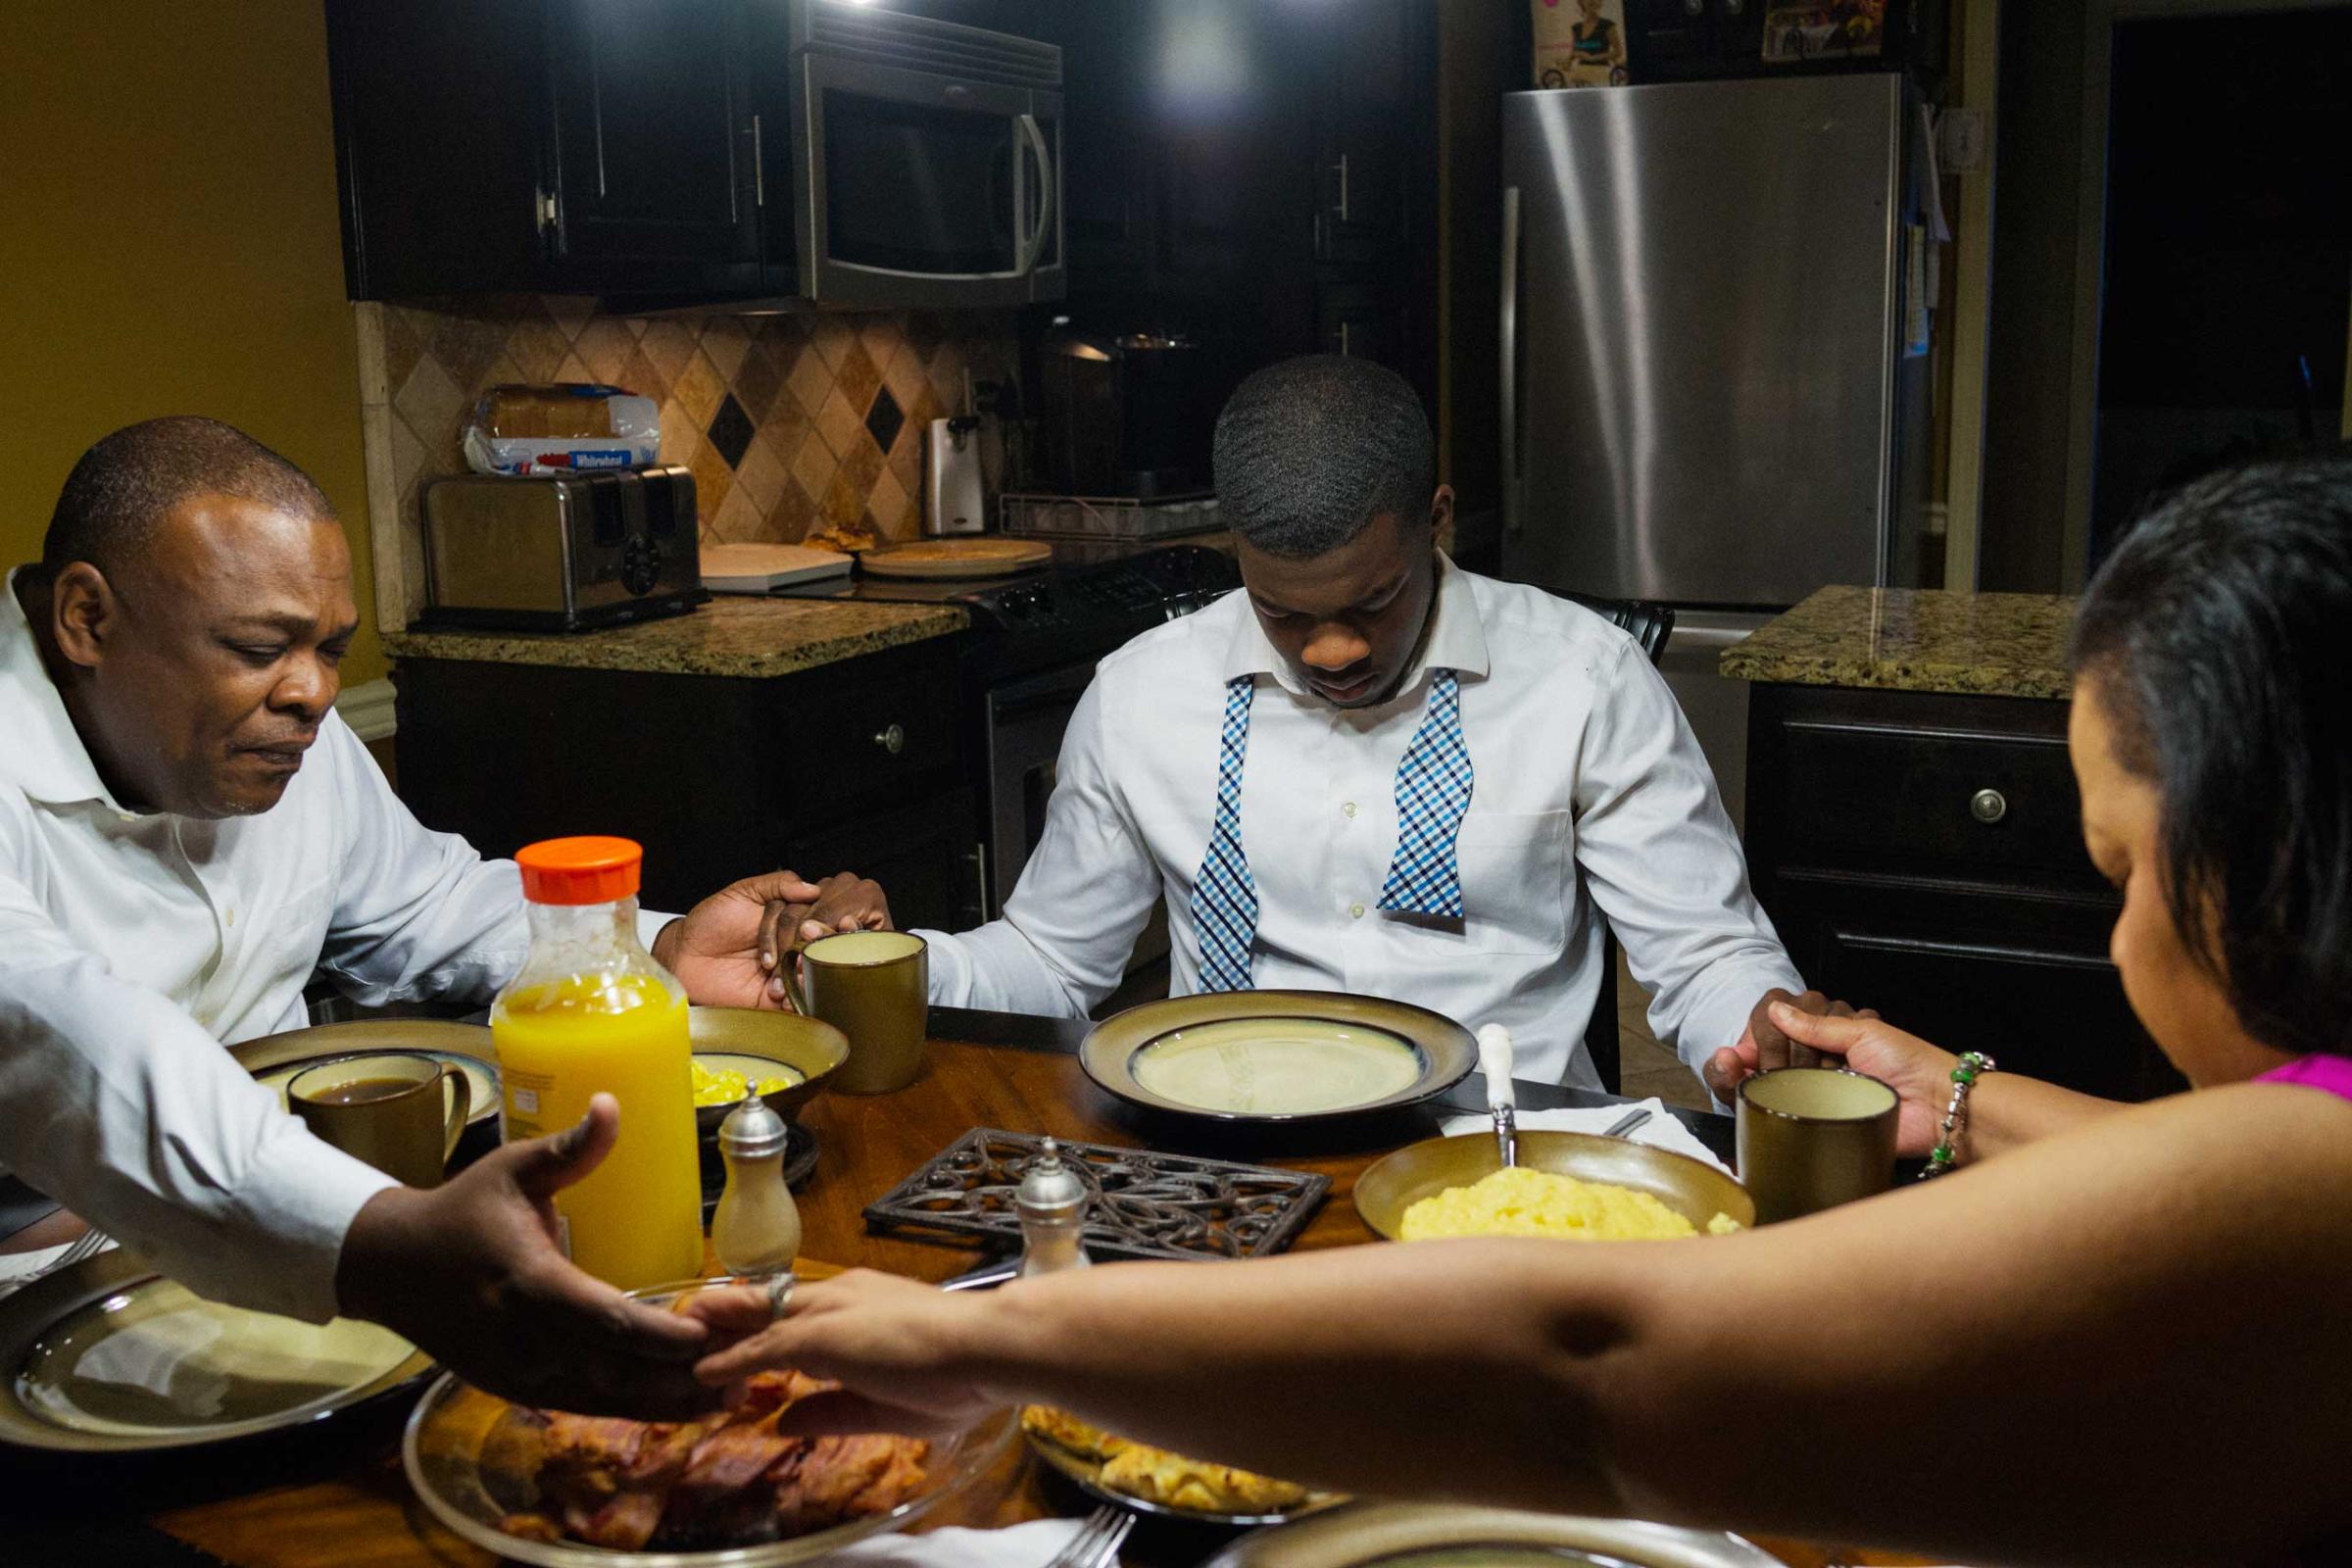 Pete Garrett prays over breakfast, with his son P.J. and wife Dr. Cynthia Garrett, at their home in Trussvile, Ala. before attending Sunday worship at the Sixteenth Street Baptist Church on March 22, 2015.